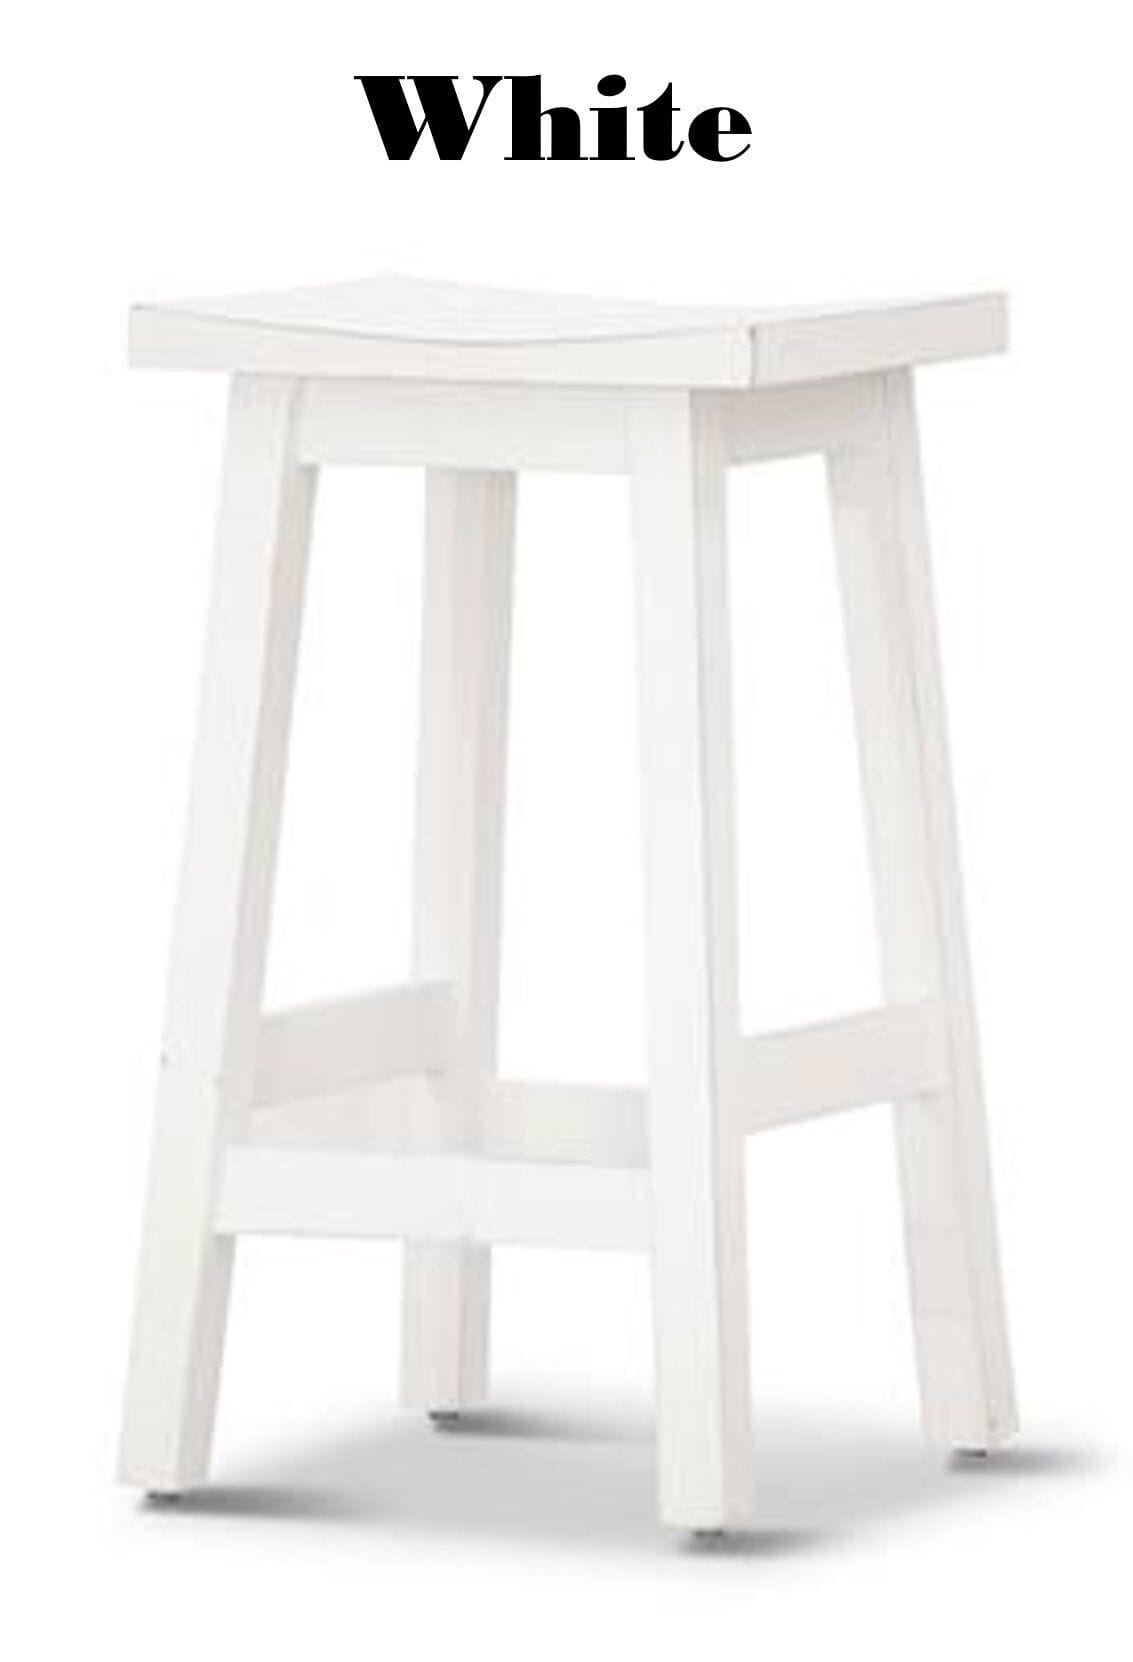 Tokyo Kitchen Stool - Set of 2 Related